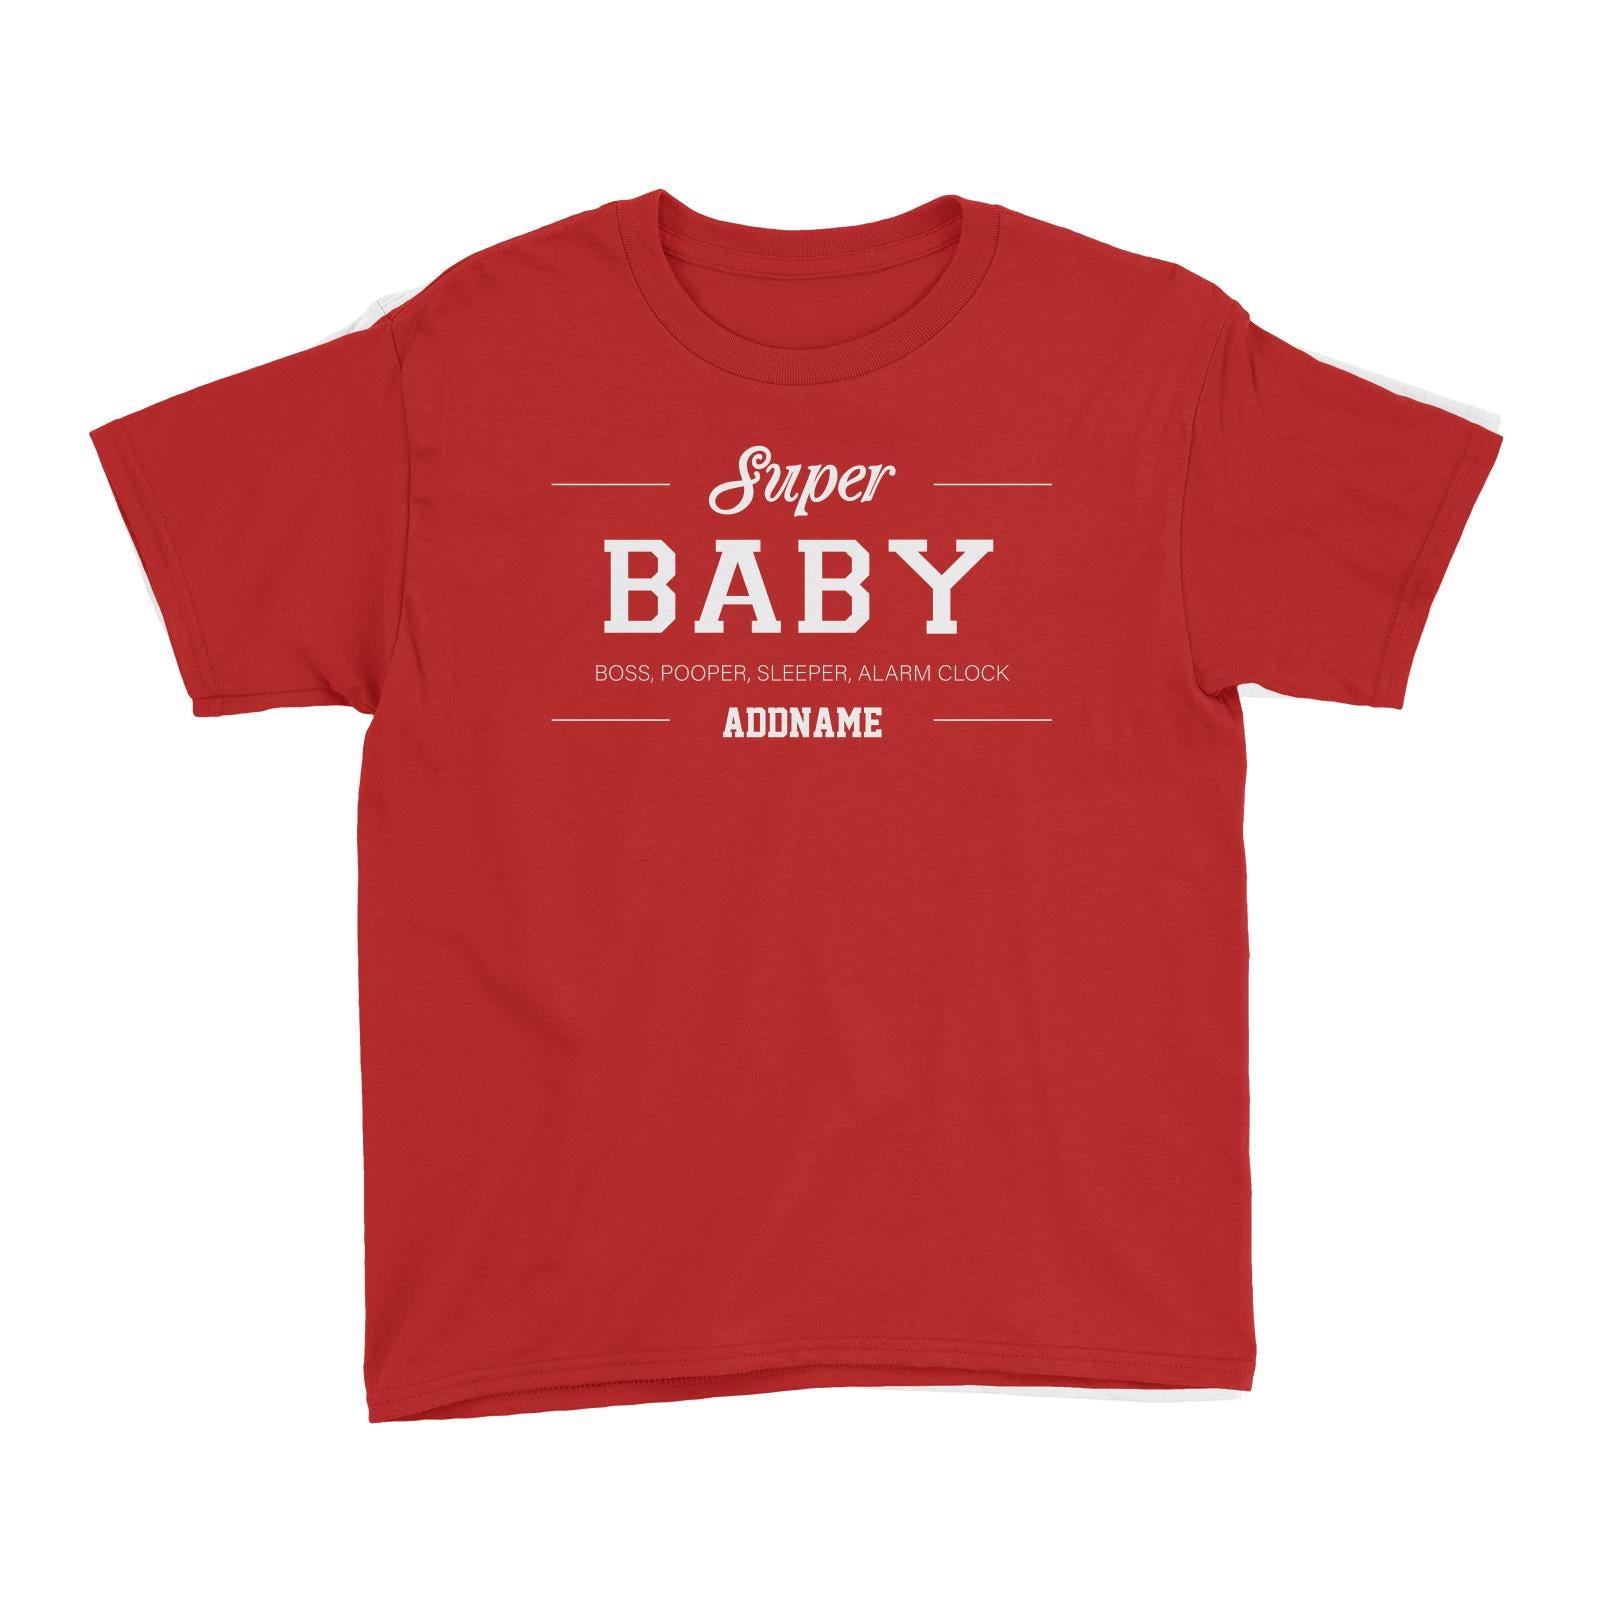 Super Definition Family Super Baby Addname Kid's T-Shirt